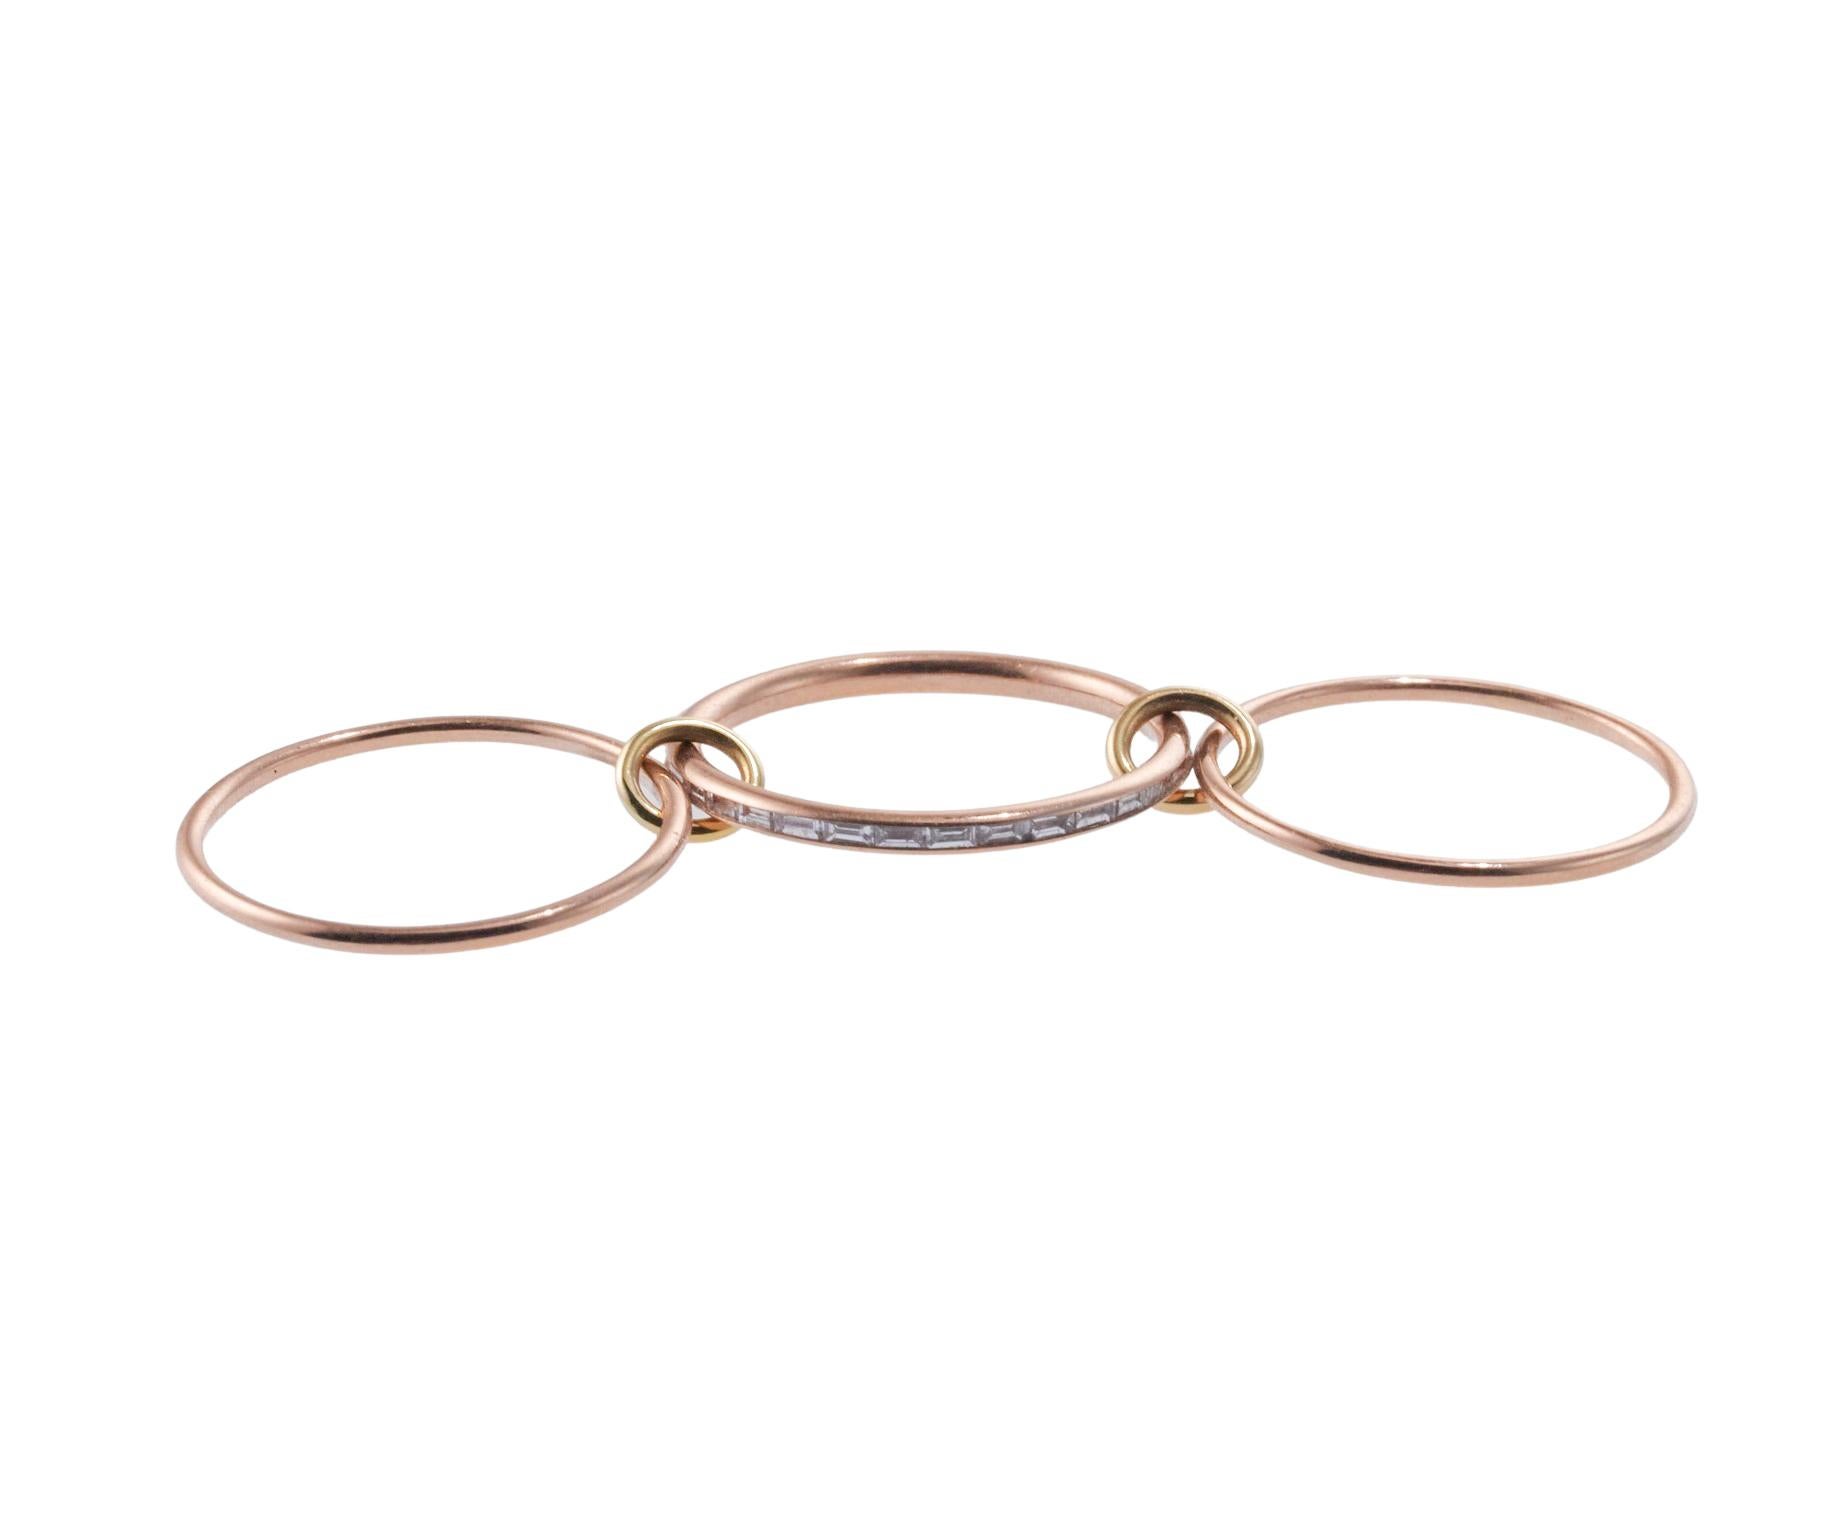 18k rose gold set of three Spinelli Kilcollin linked ring, set with approx. 0.39ctw in VS/G diamonds. Ring size 6.25, approx. 6mm wide, when worn. Marked: SK, 18k. Weight is 3.7 grams. Retail Value $3,600.